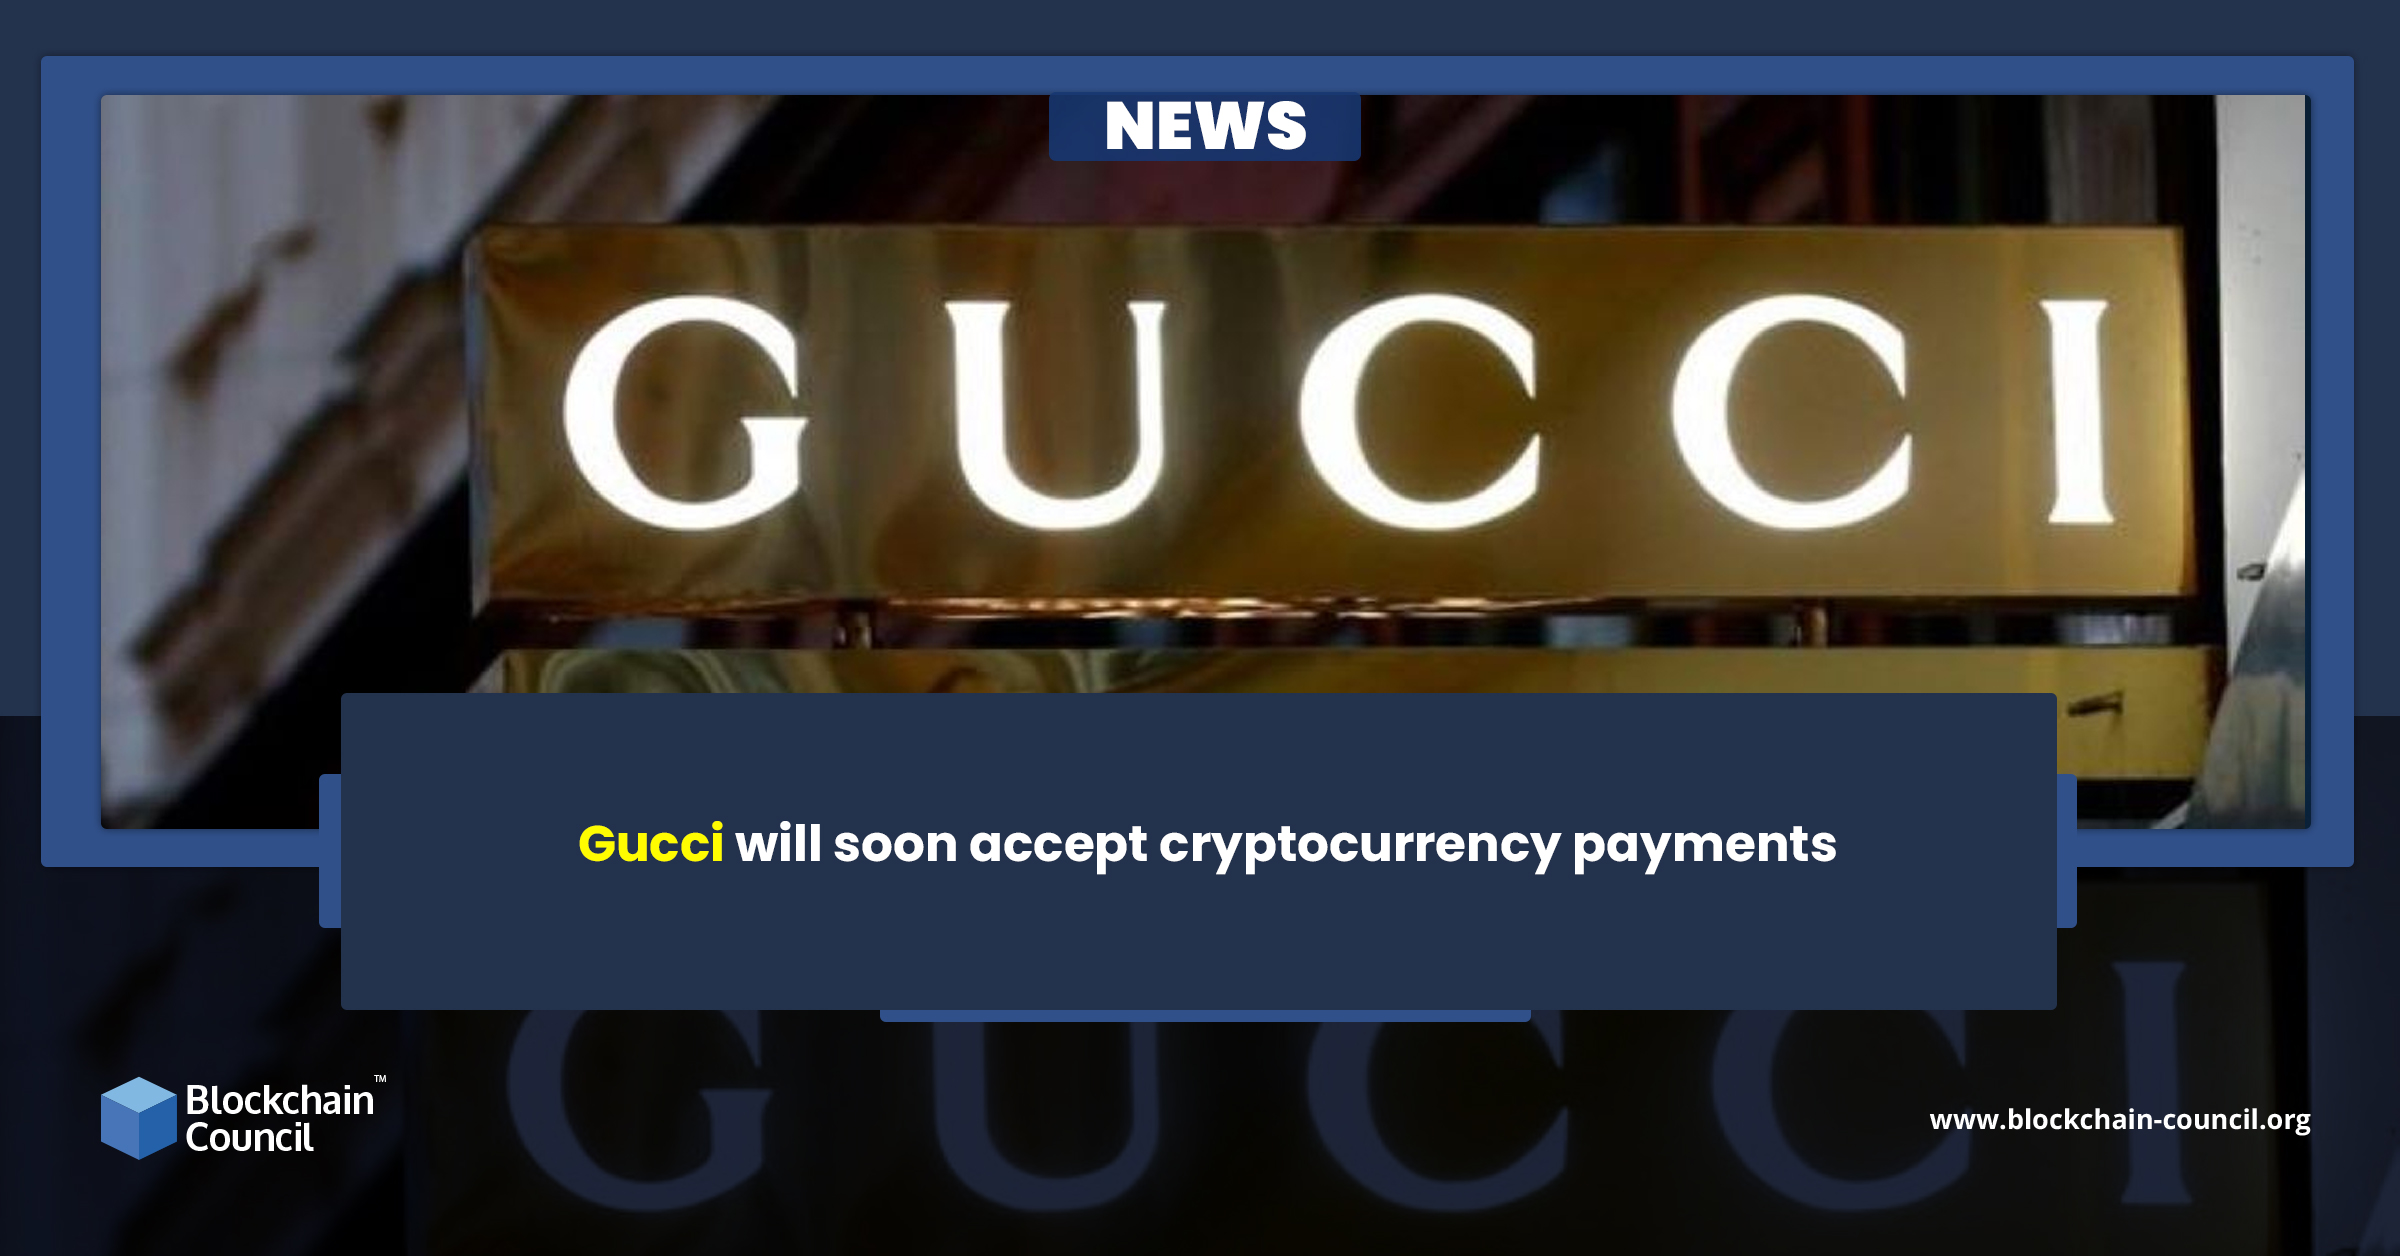 Gucci will soon accept cryptocurrency payments